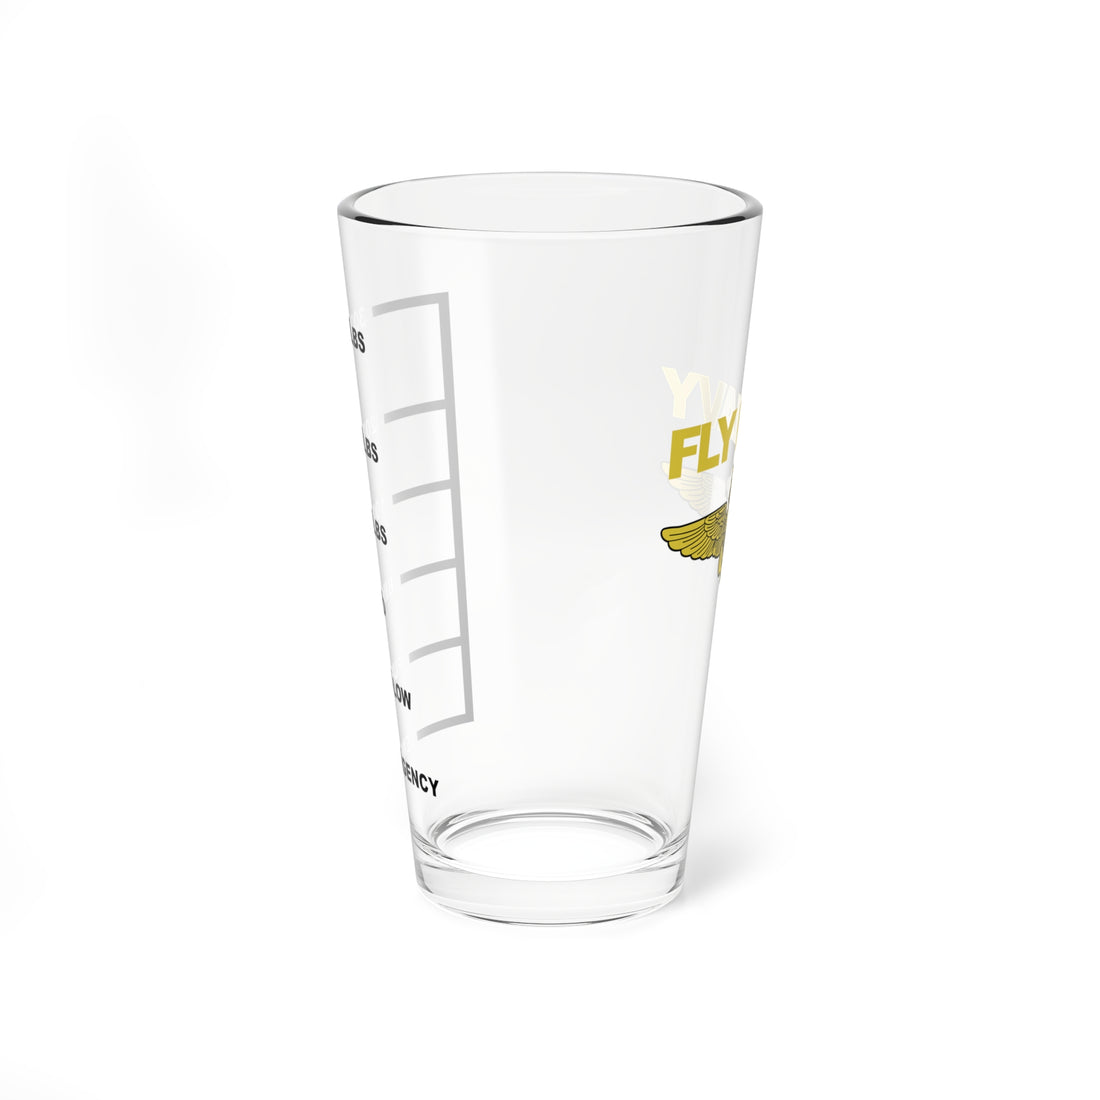 FLY NAVY Fuel Low Pint Glass Mixing Glass, 16oz, Navy, Aviation, Wings, Veteran, Helicopter,